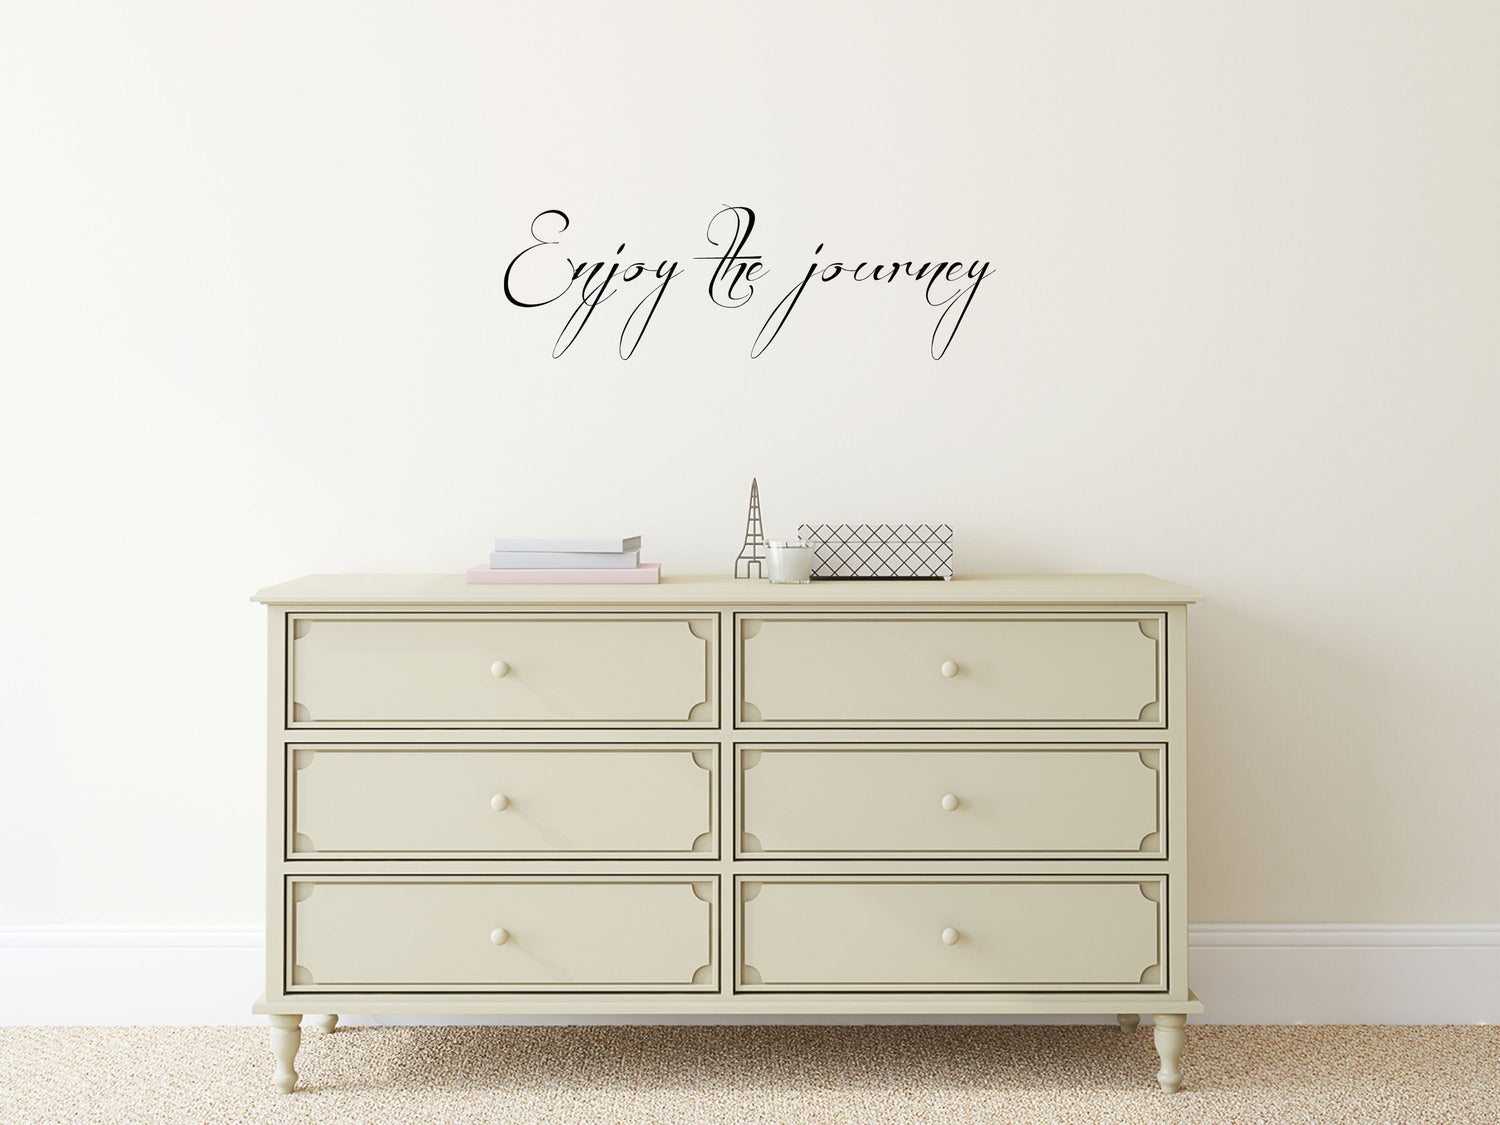 Enjoy The Journey - Inspirational Wall Decals Vinyl Wall Decal Inspirational Wall Signs 